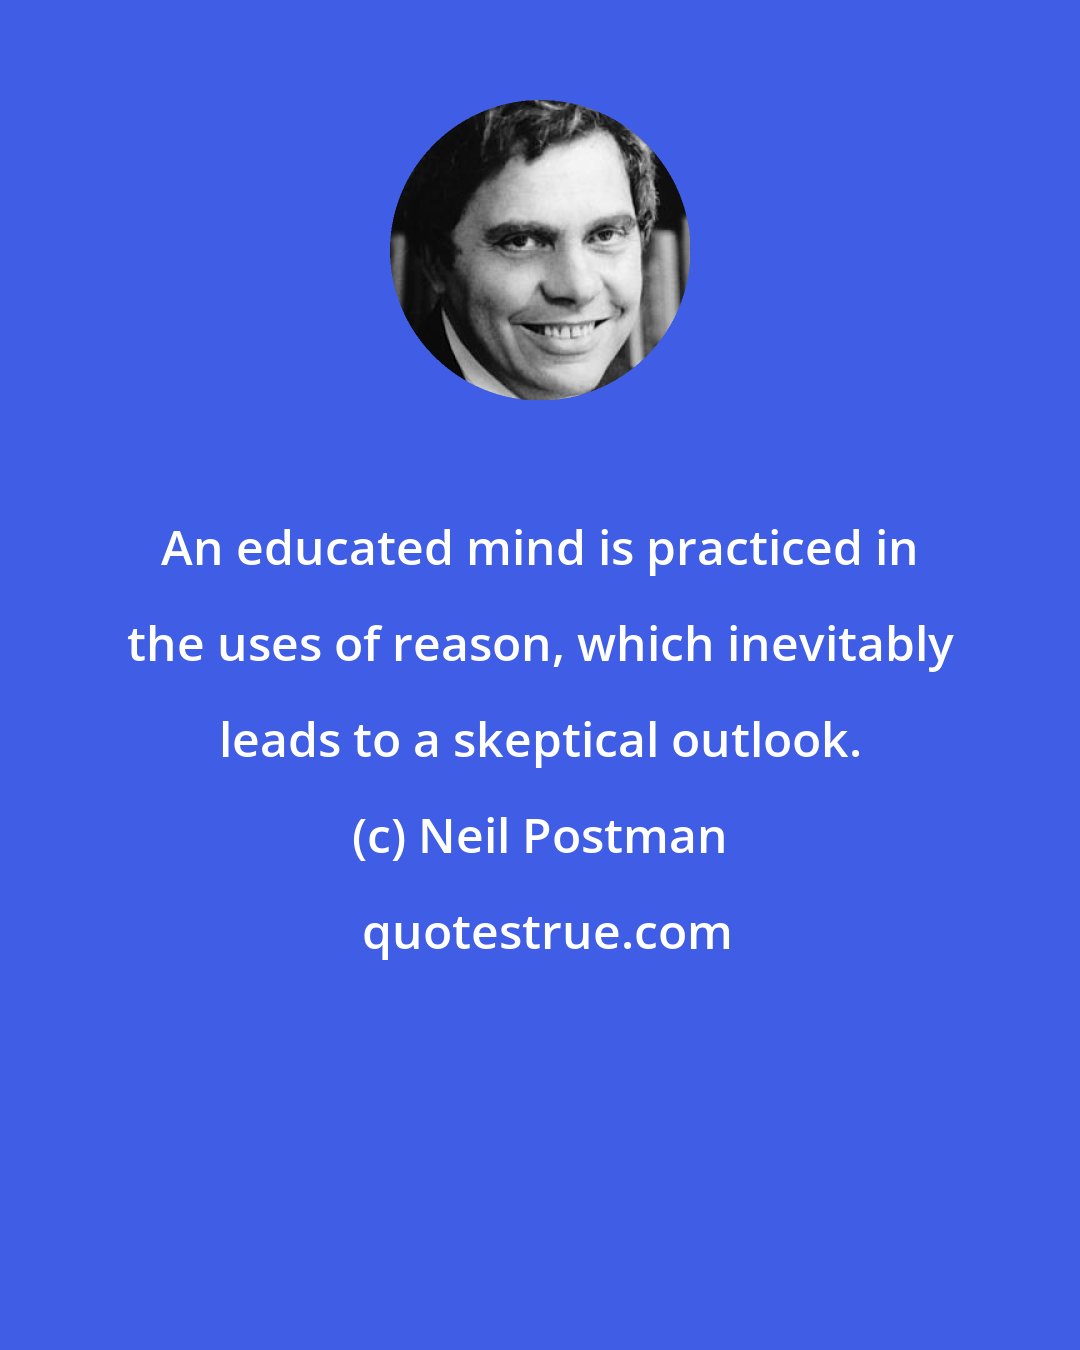 Neil Postman: An educated mind is practiced in the uses of reason, which inevitably leads to a skeptical outlook.